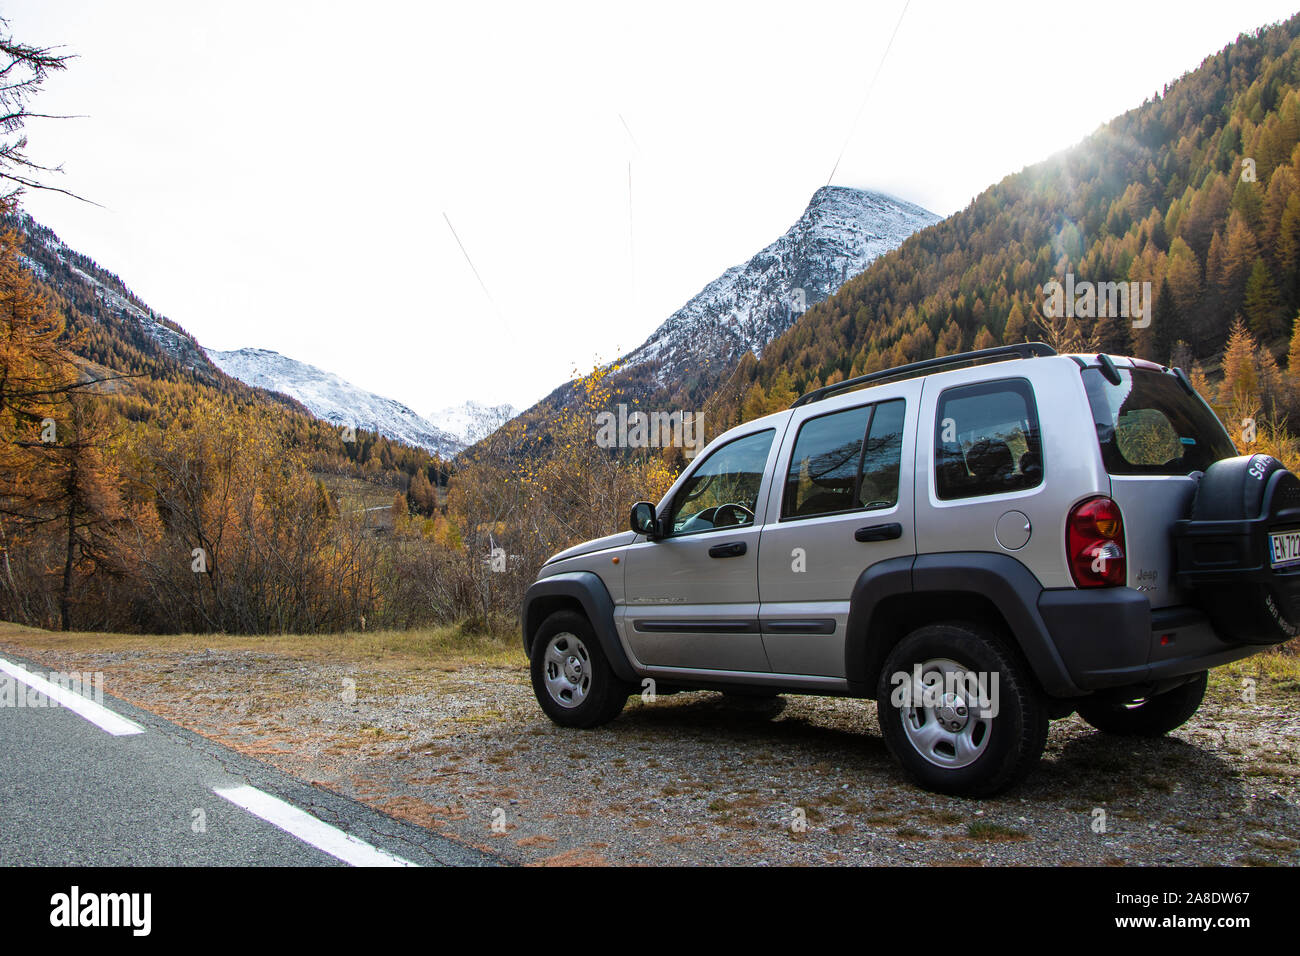 A driving journey on a Jeep KJ Liberty 2002 Cherokee Sport a 4x4 Off-roader  car drive in the mountains to explore and discover stunning landscapes  Stock Photo - Alamy